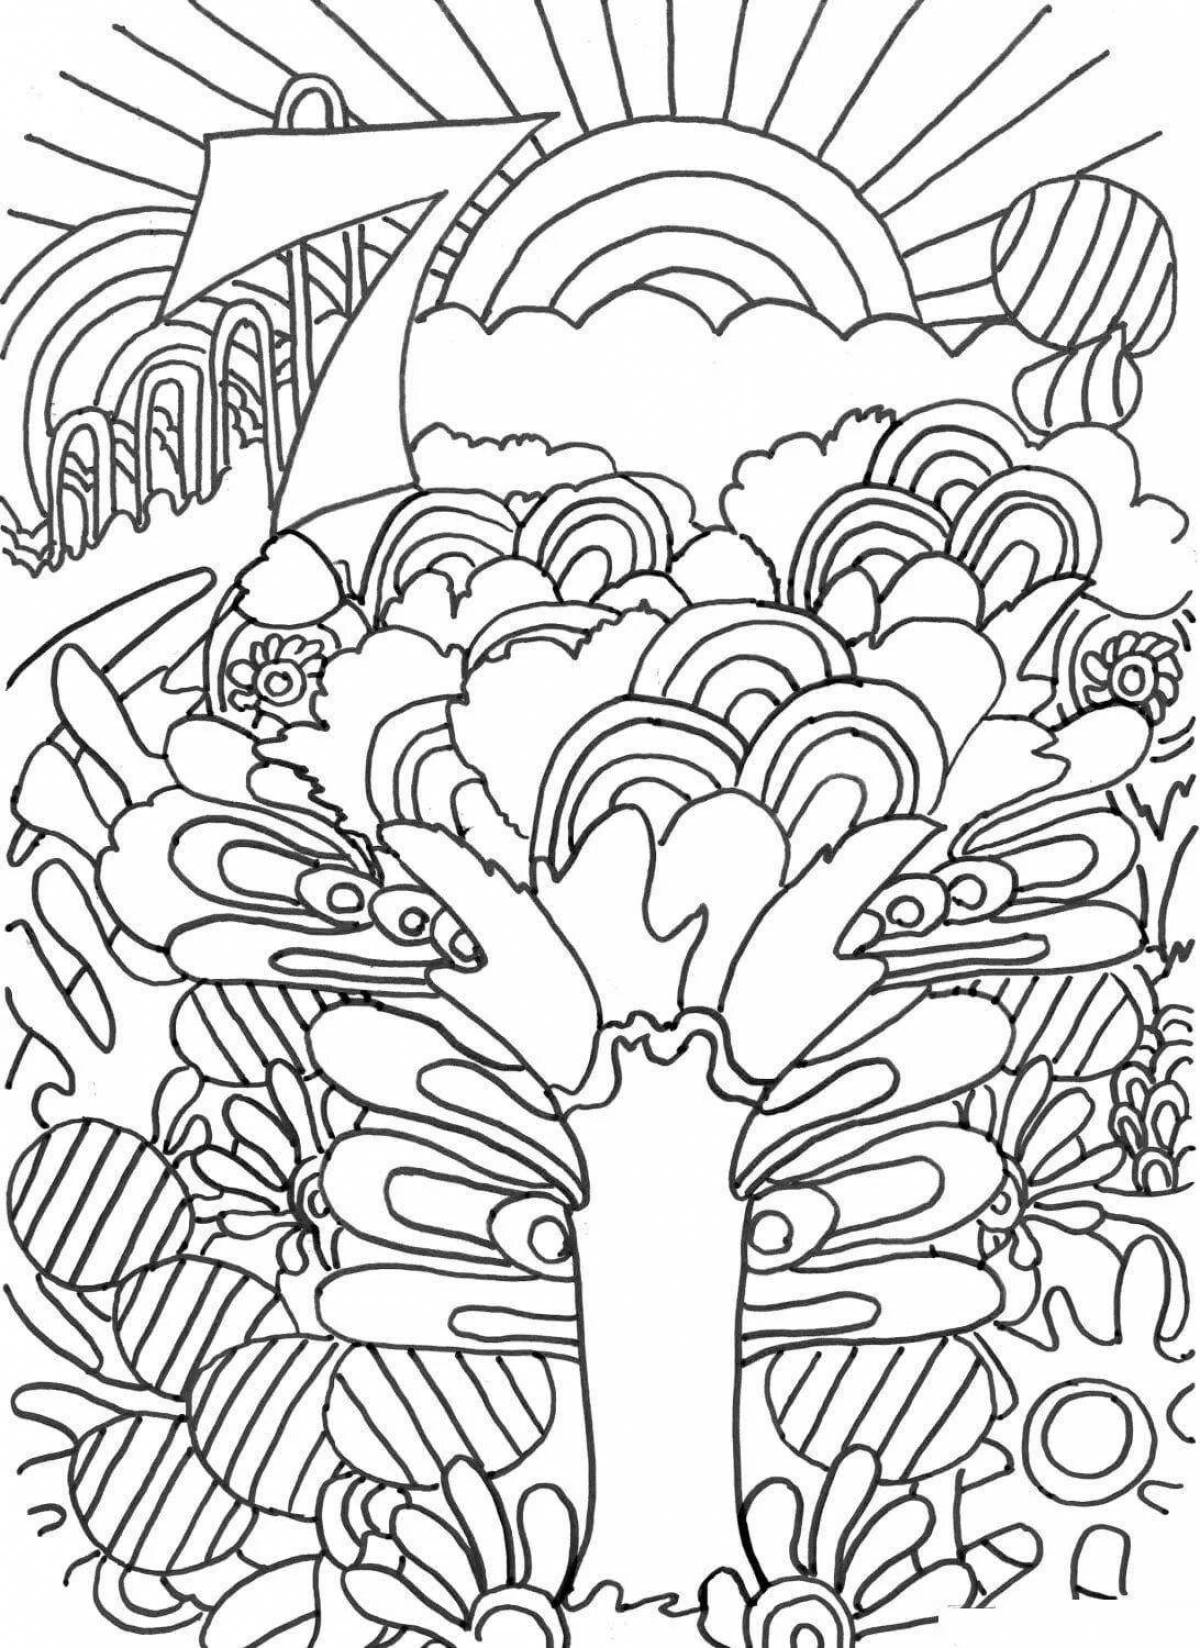 Refreshing sunset coloring page for kids